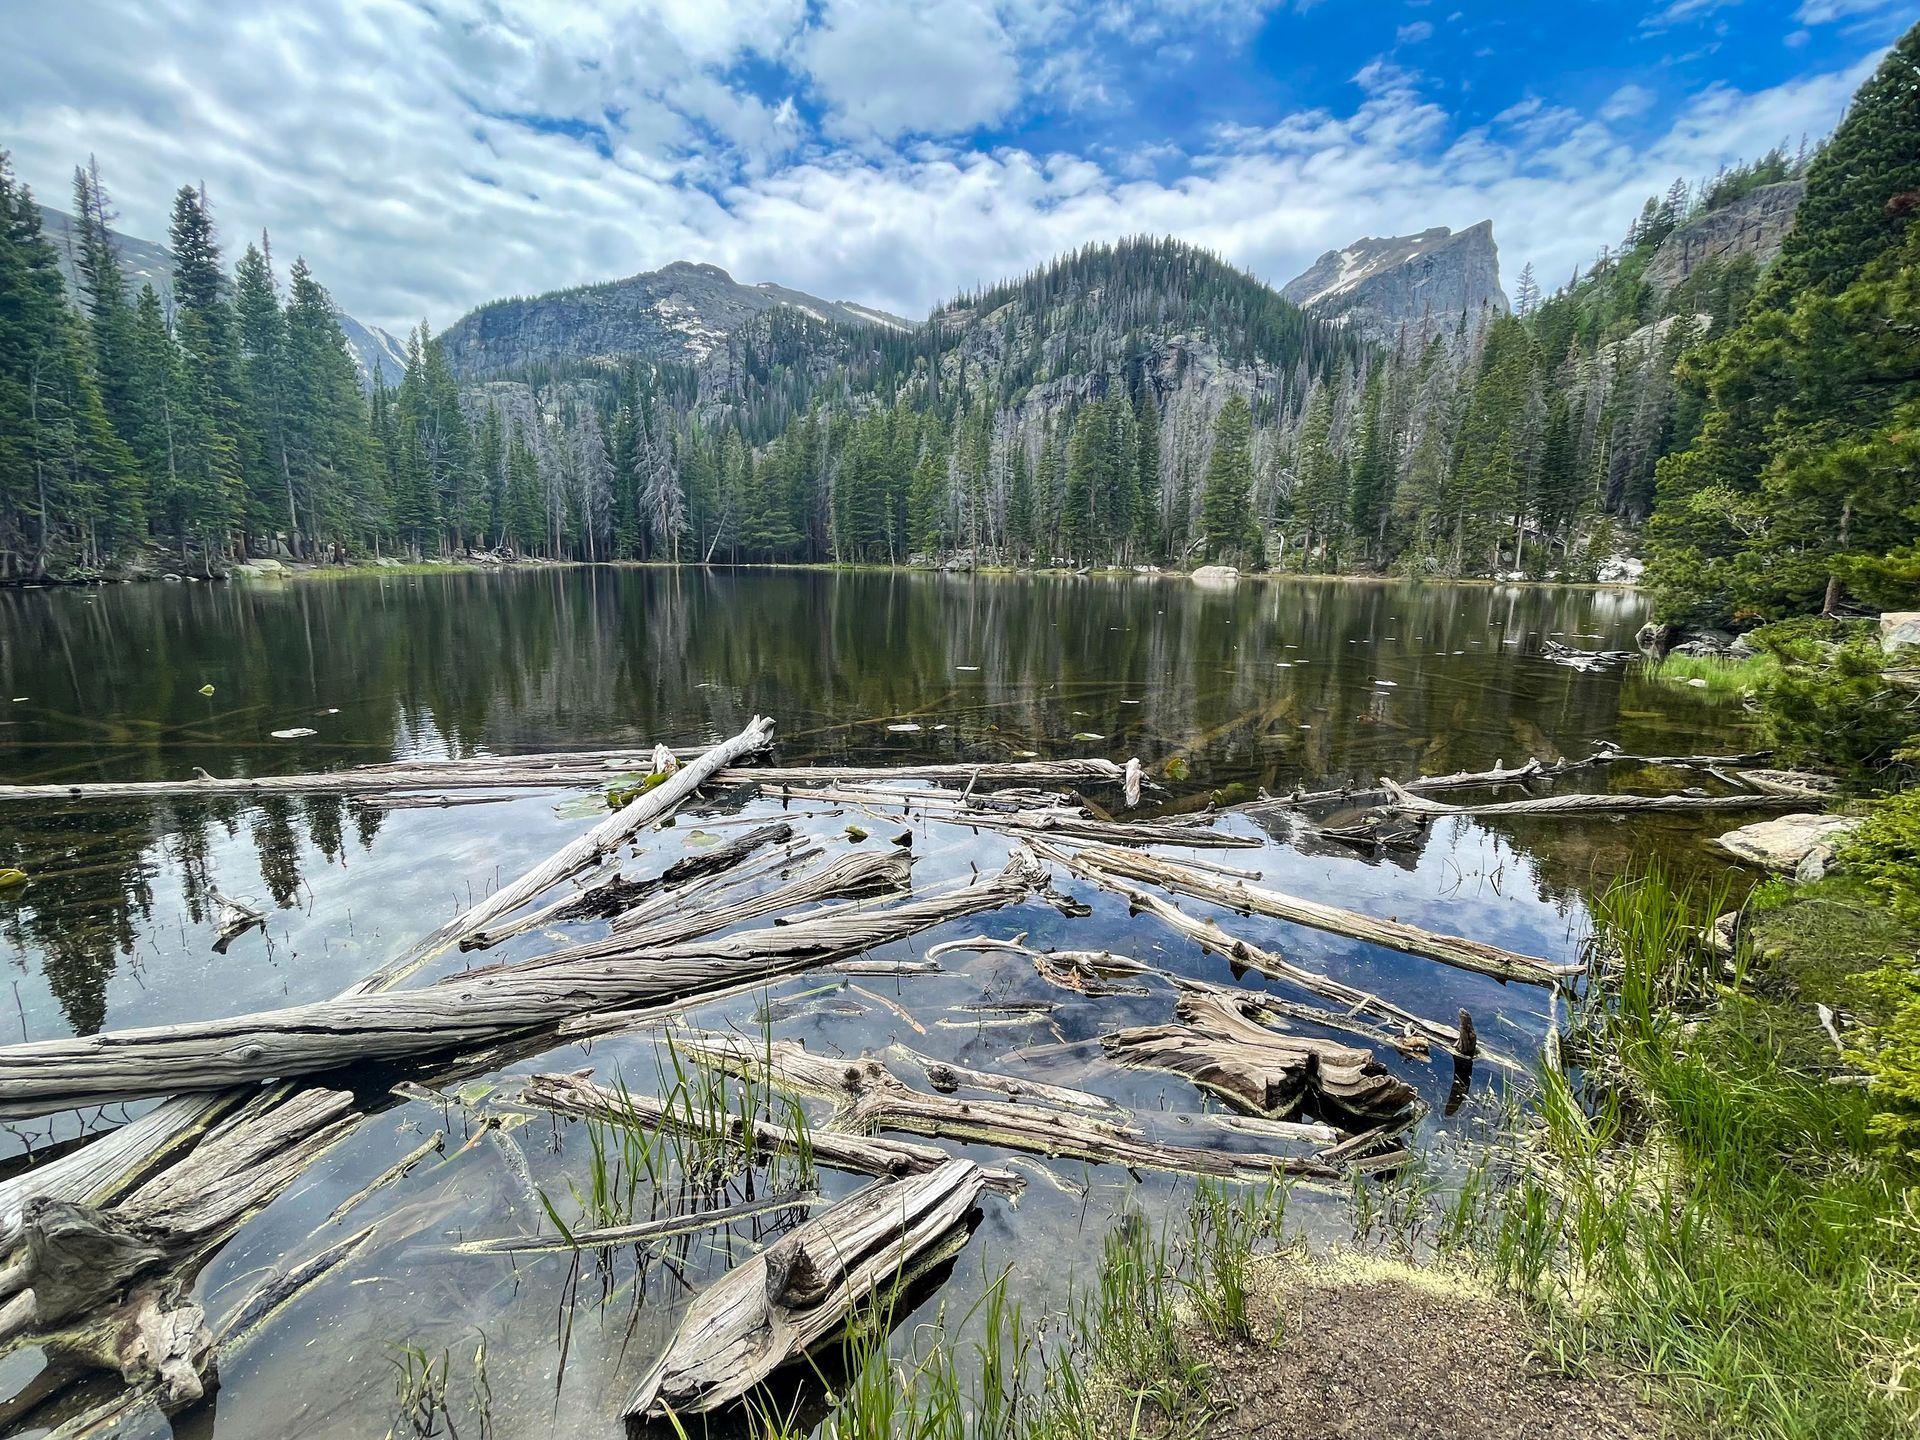 A lake surrounded by pine trees and mountains in the distance. Several logs are laying in the water.